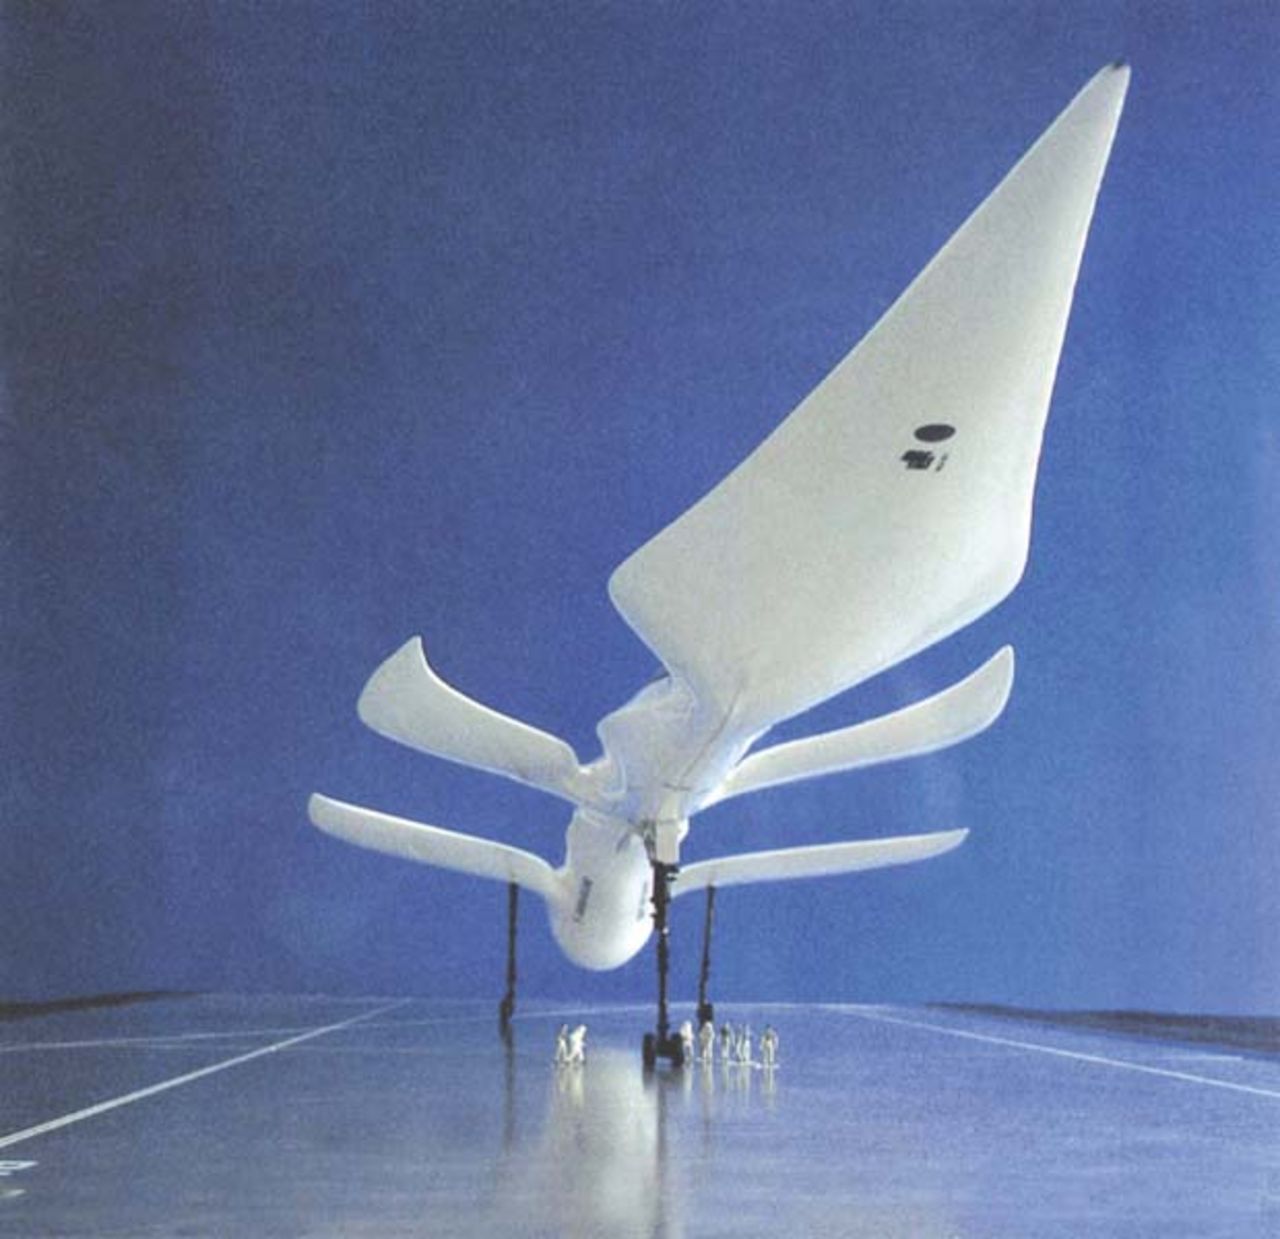 Study for a Mach five passenger aircraft, 1983. The huge engine sucks in air through the perforated outer edge of the aircraft body. The four-winged supersonic plane was meant to cover the distance between Tokyo and London in just three hours.